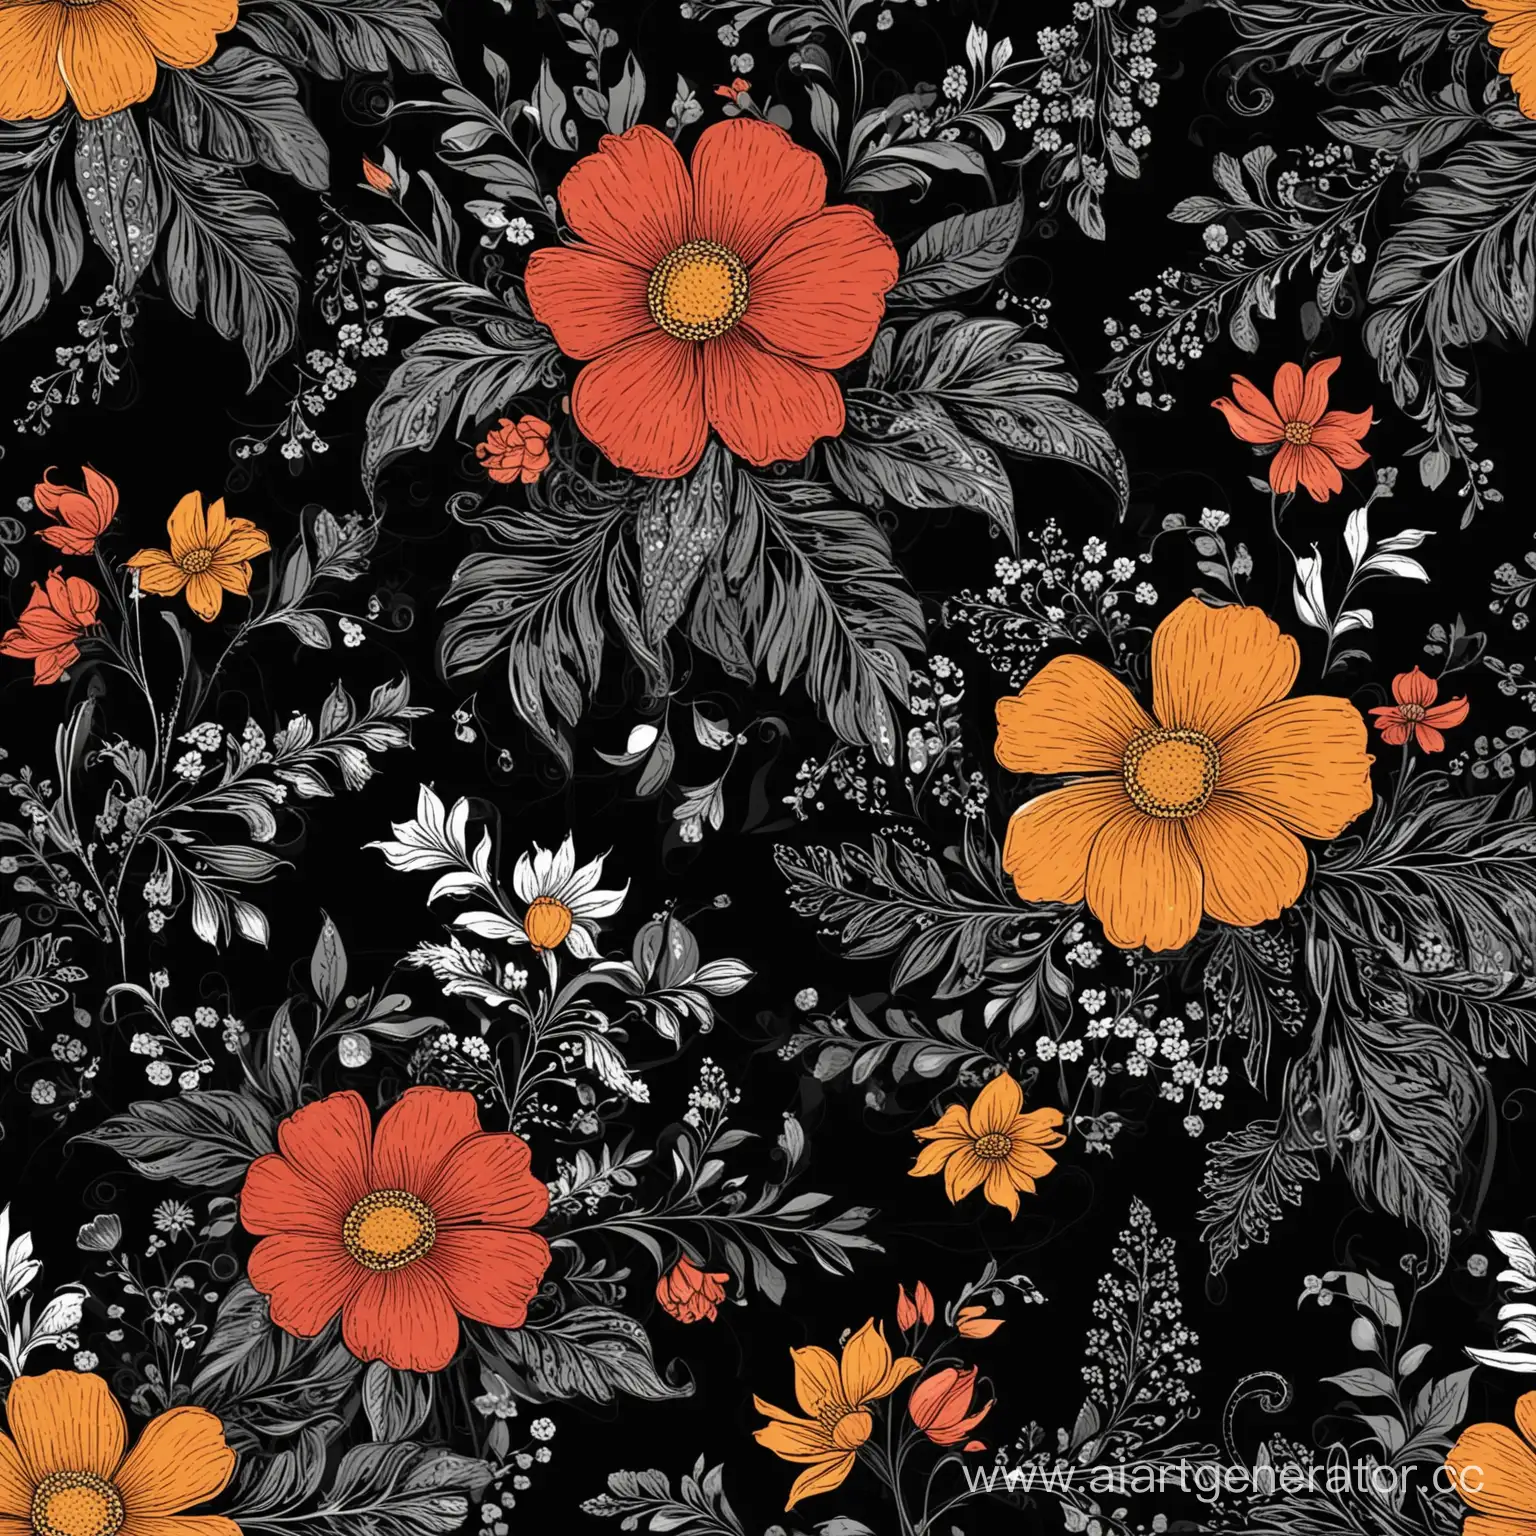 flowers and patterns on a black background